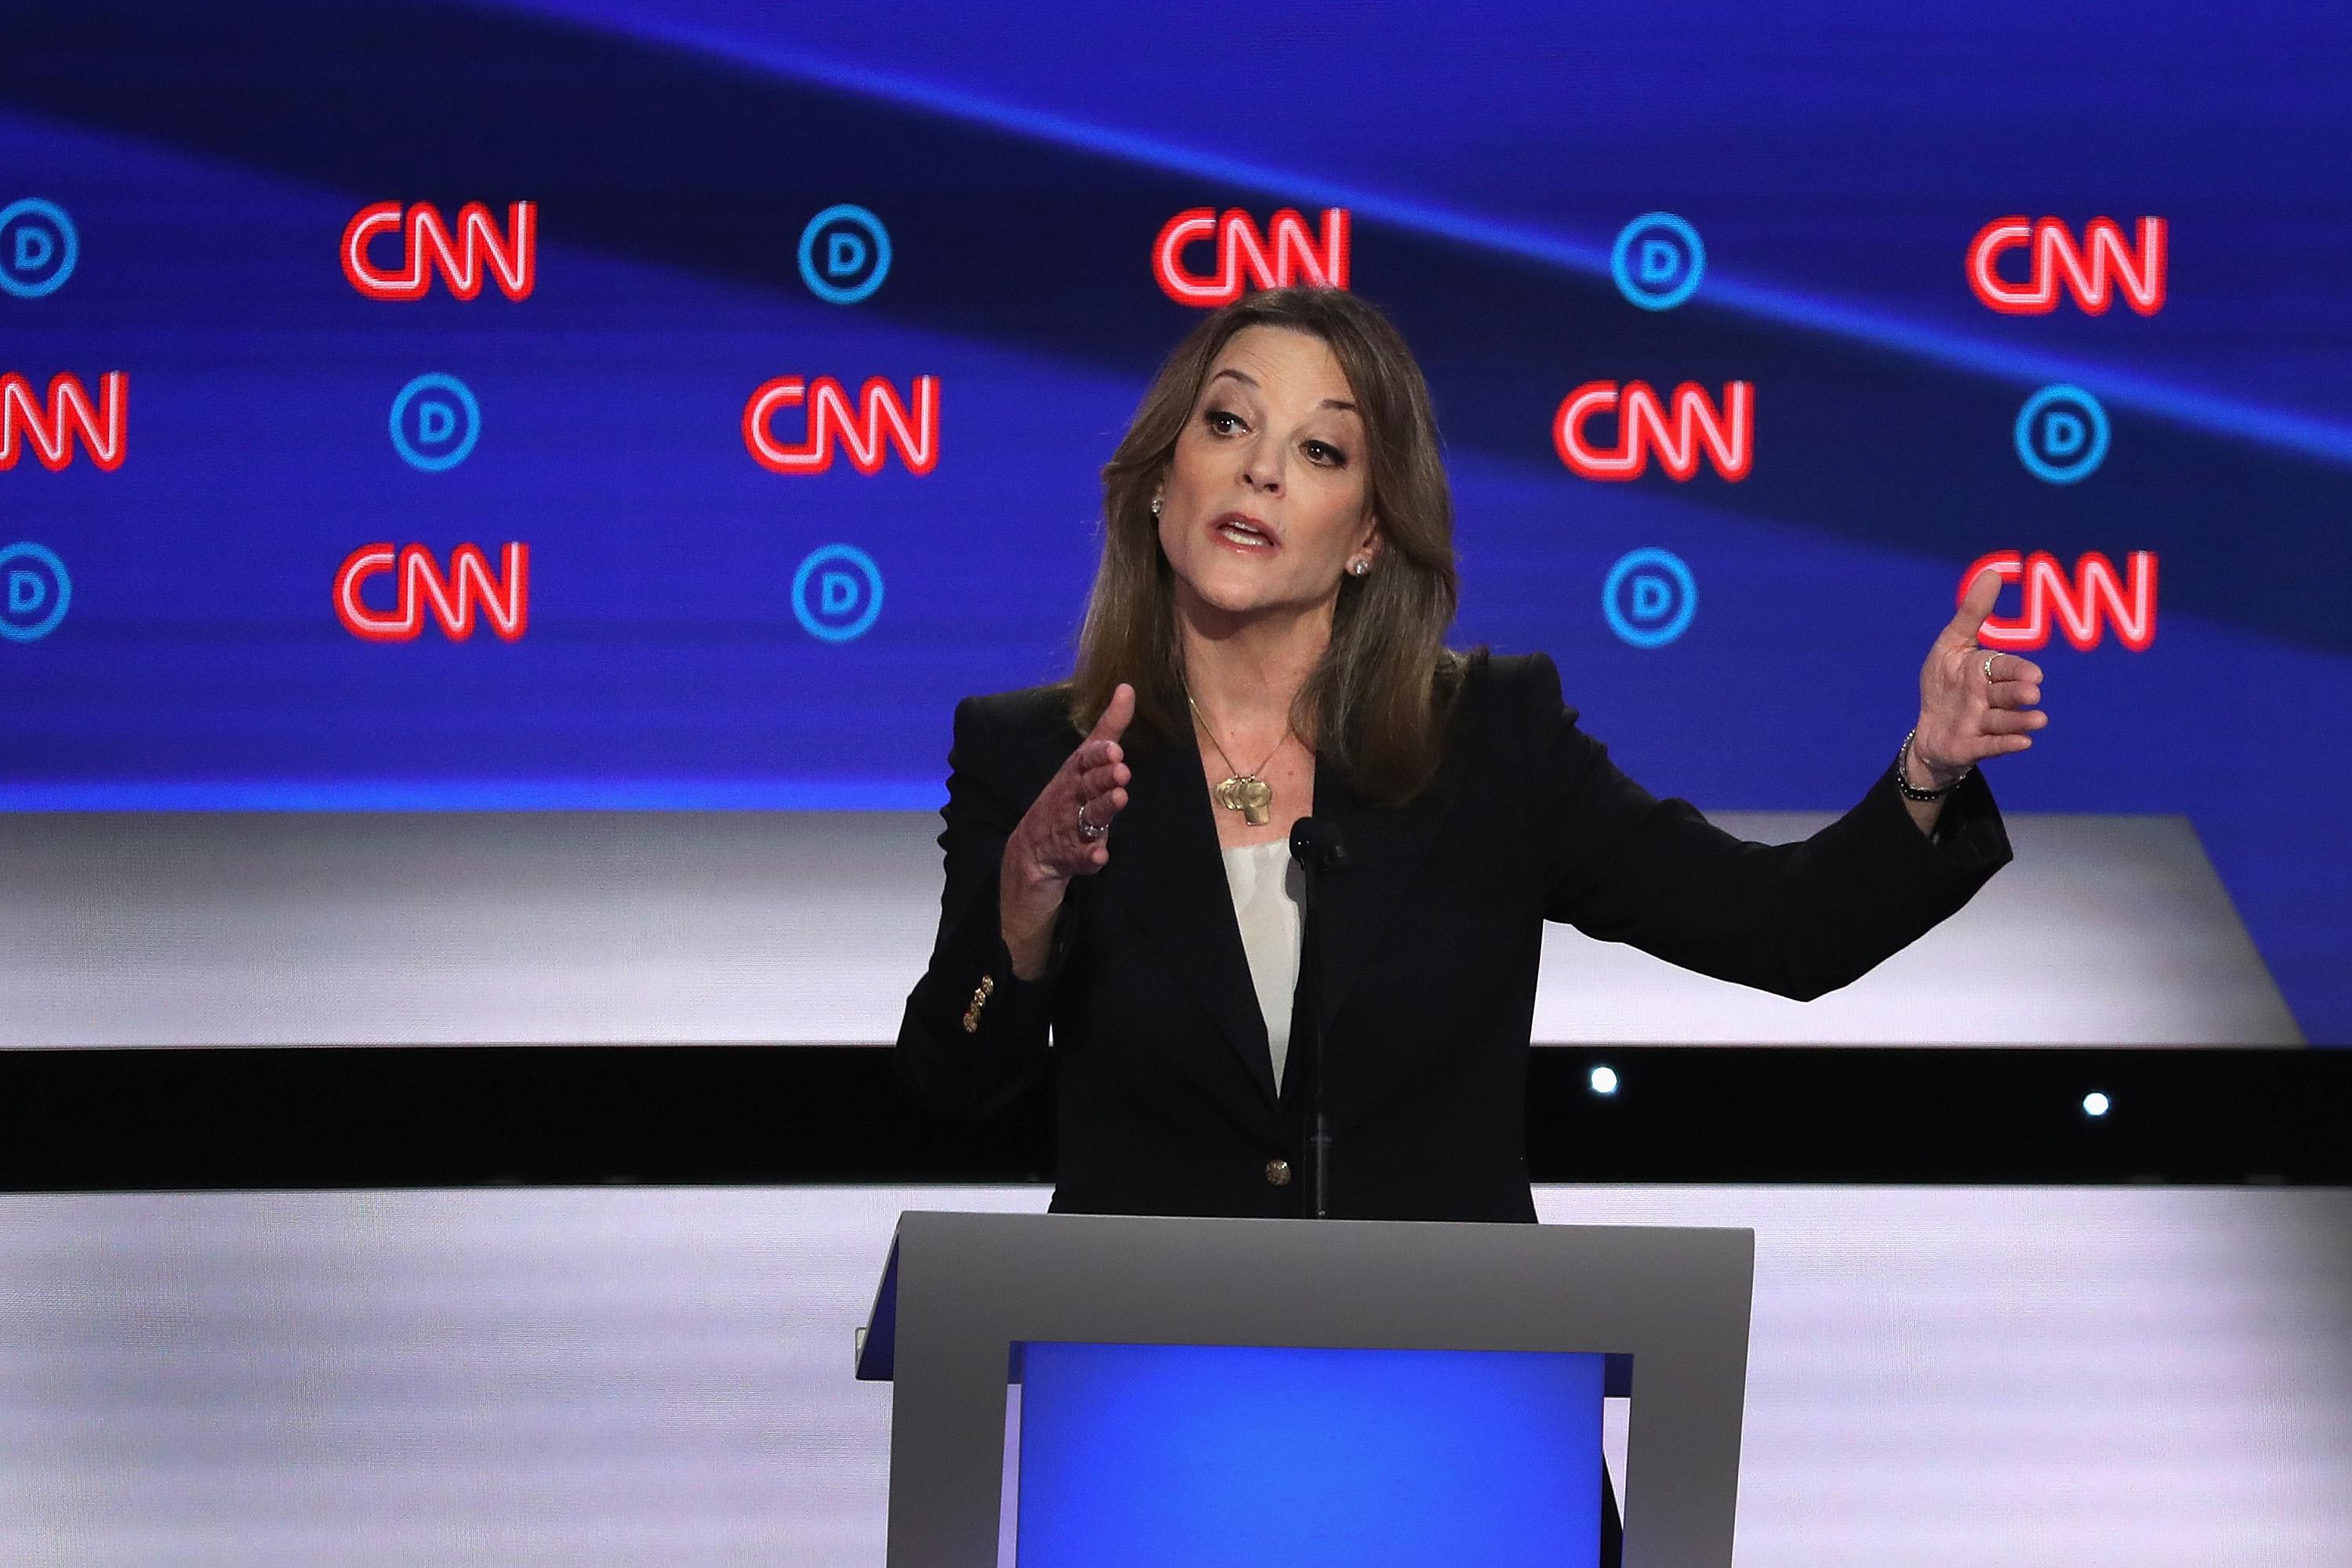 Marianne Williamson, in a dark suit, stands against a debate backdrop with the CNN logo repeating on it and makes a gesture with her hands as if measuring something in the air. 